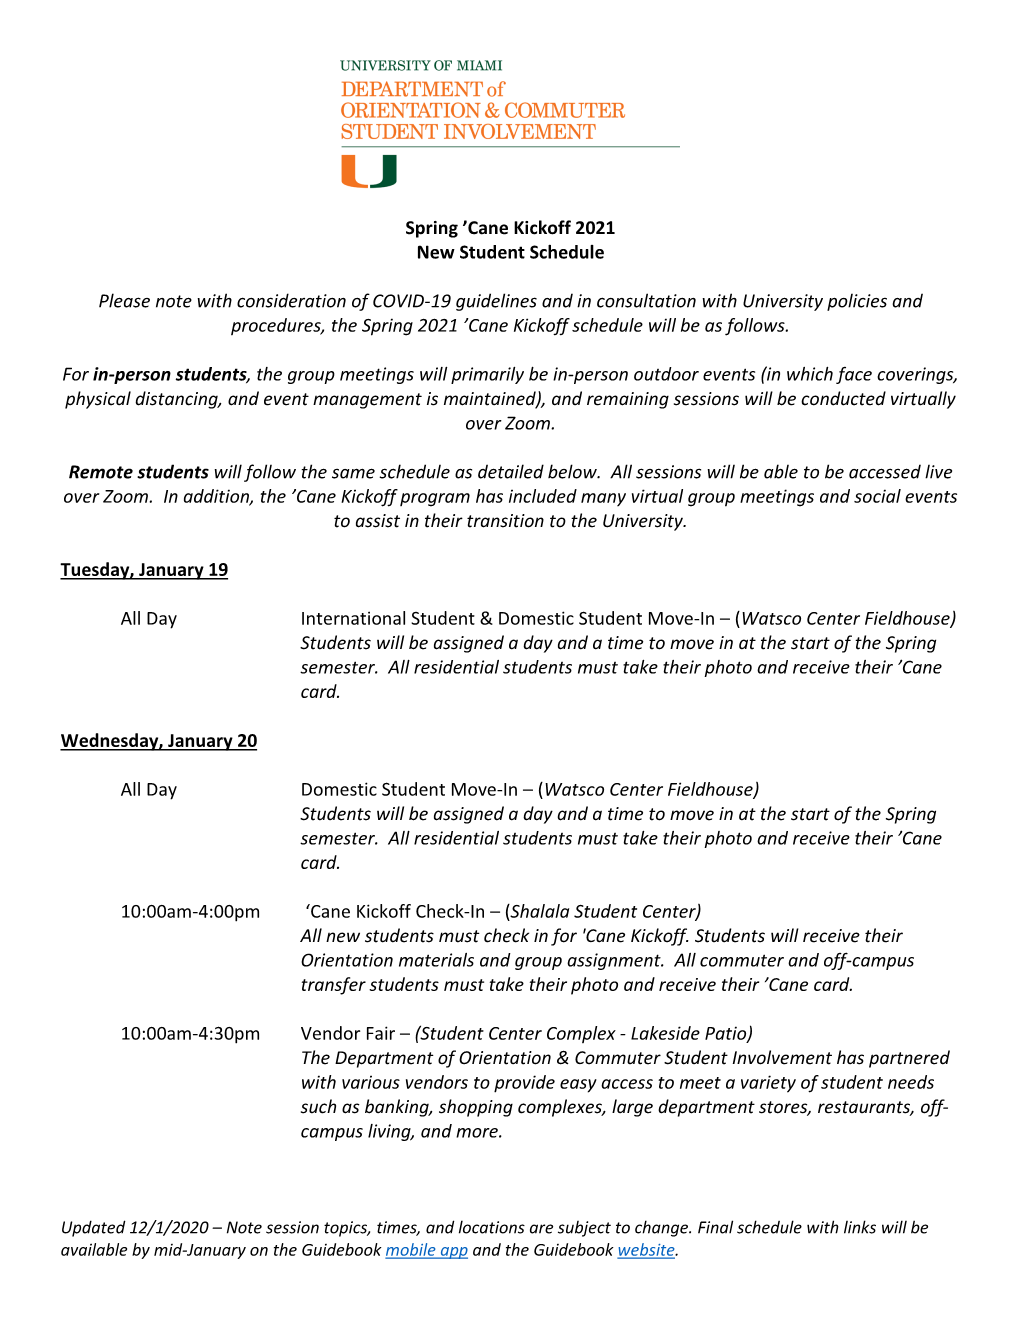 Spring 'Cane Kickoff 2021 New Student Schedule Please Note with Consideration of COVID-19 Guidelines and in Consultation With